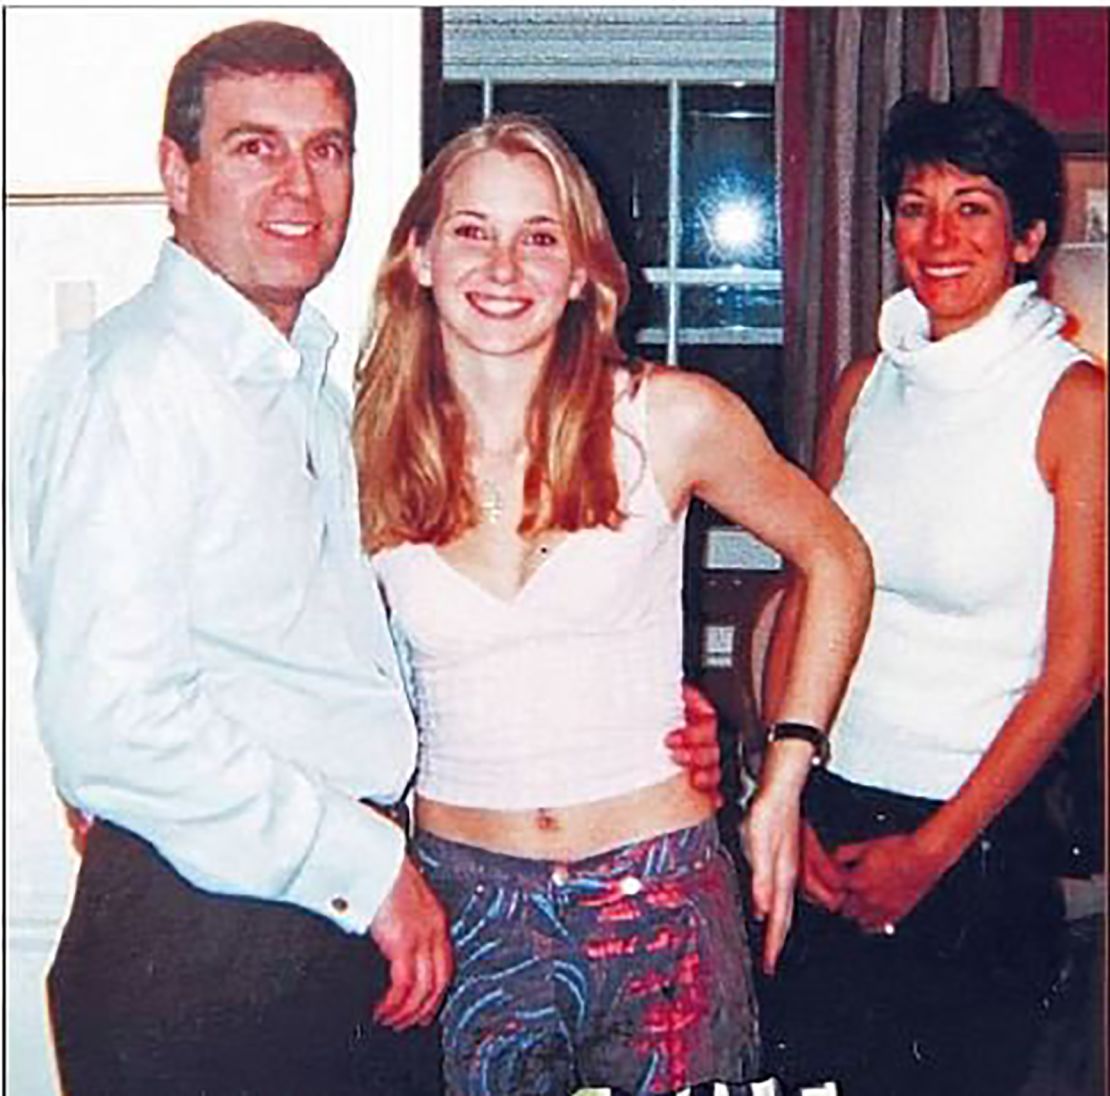 A photograph appearing to show Prince Andrew with Jeffrey Epstein accuser Virginia Giuffre and, in the background, Ghislaine Maxwell.